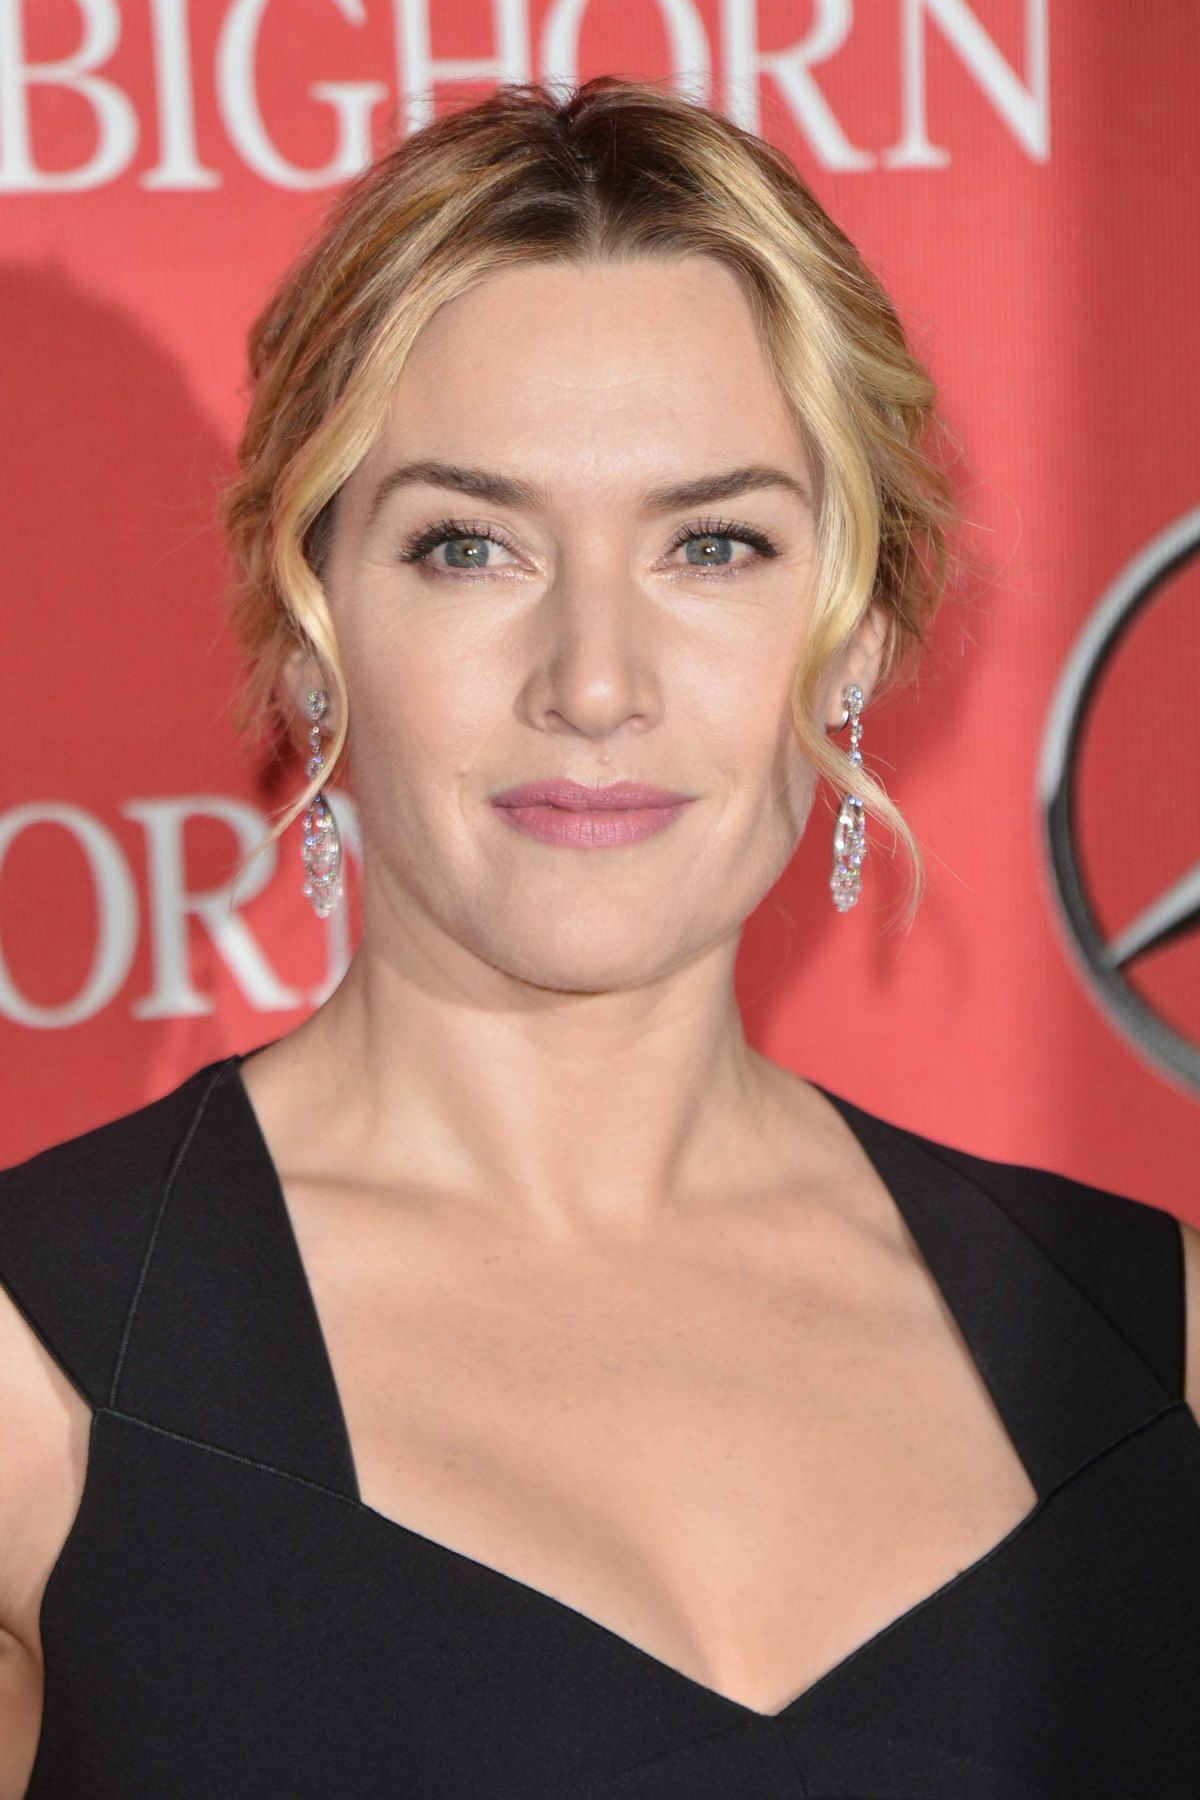 KATE WINSLET at 27th Annual Palm Springs International Film Festival 01/02/2015 - HawtCelebs